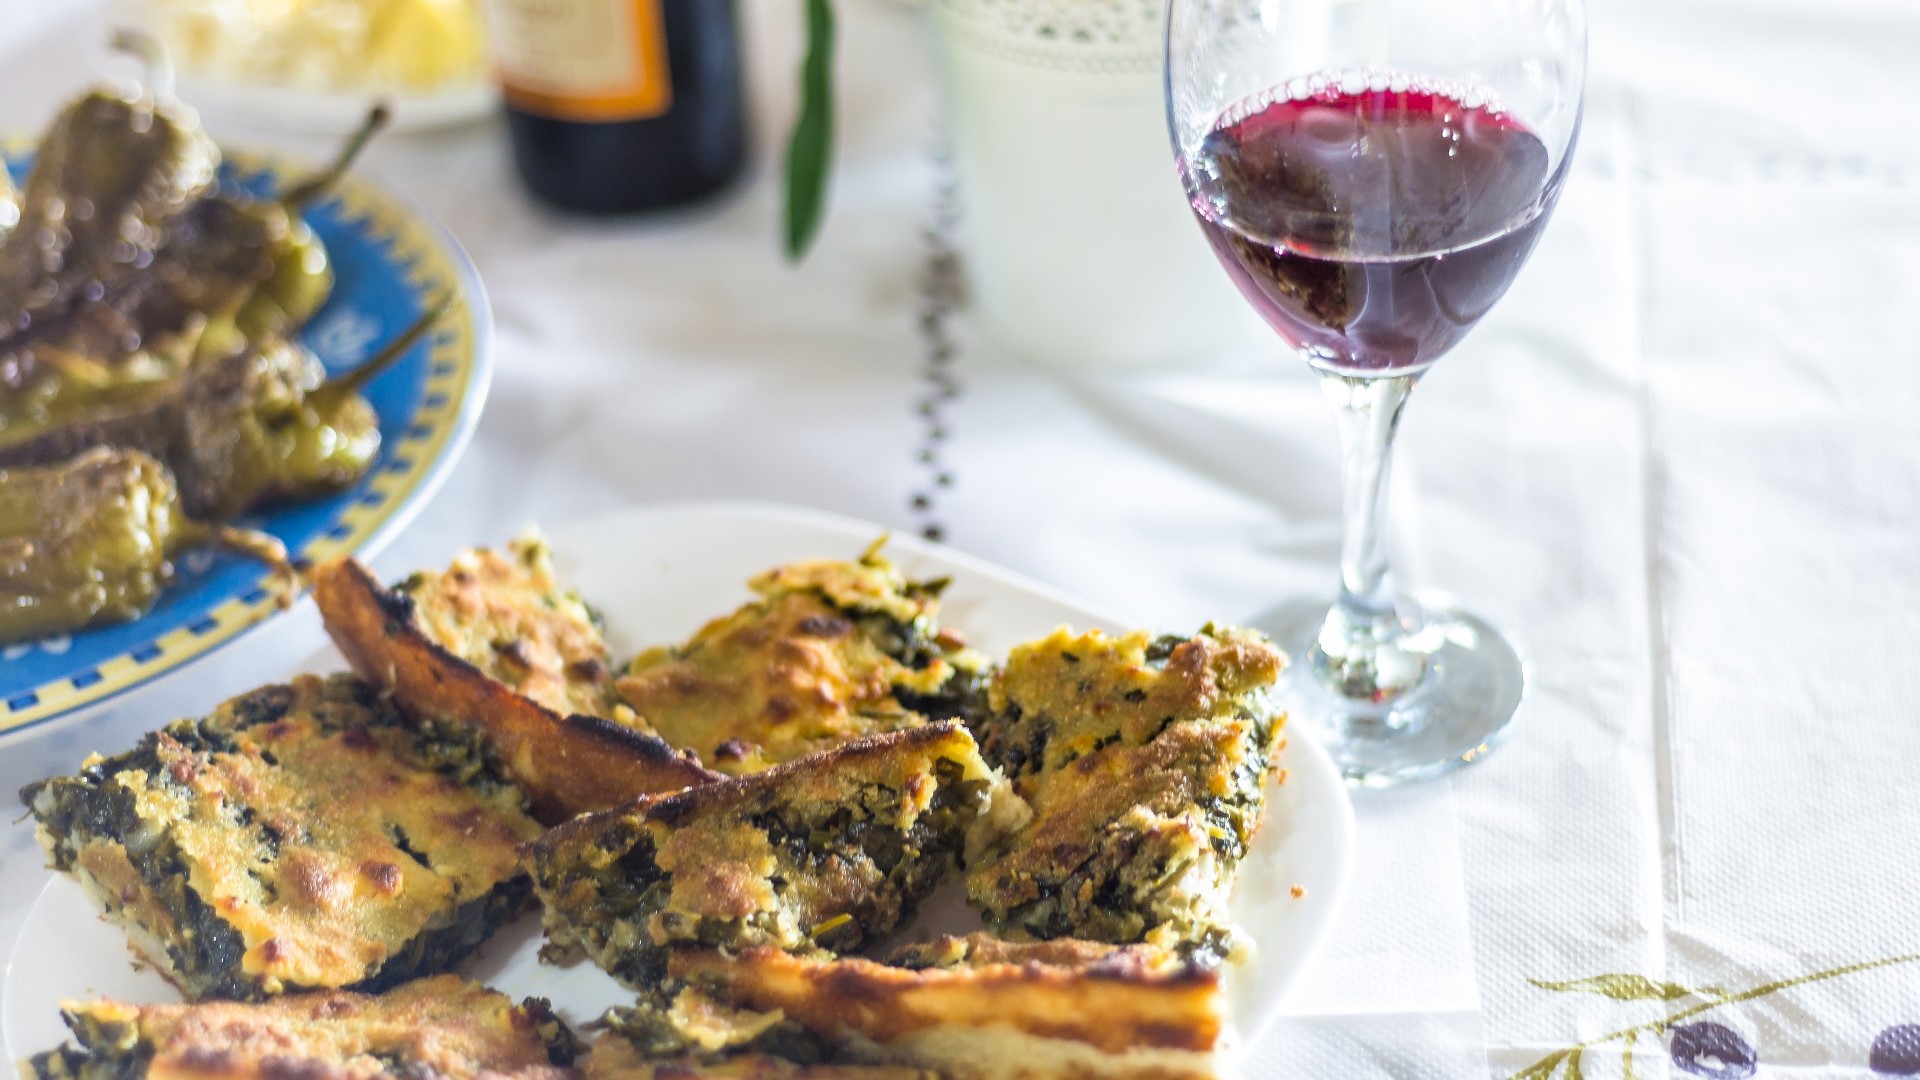 Albanian spinach byrek pastry, red wine and roast peppers